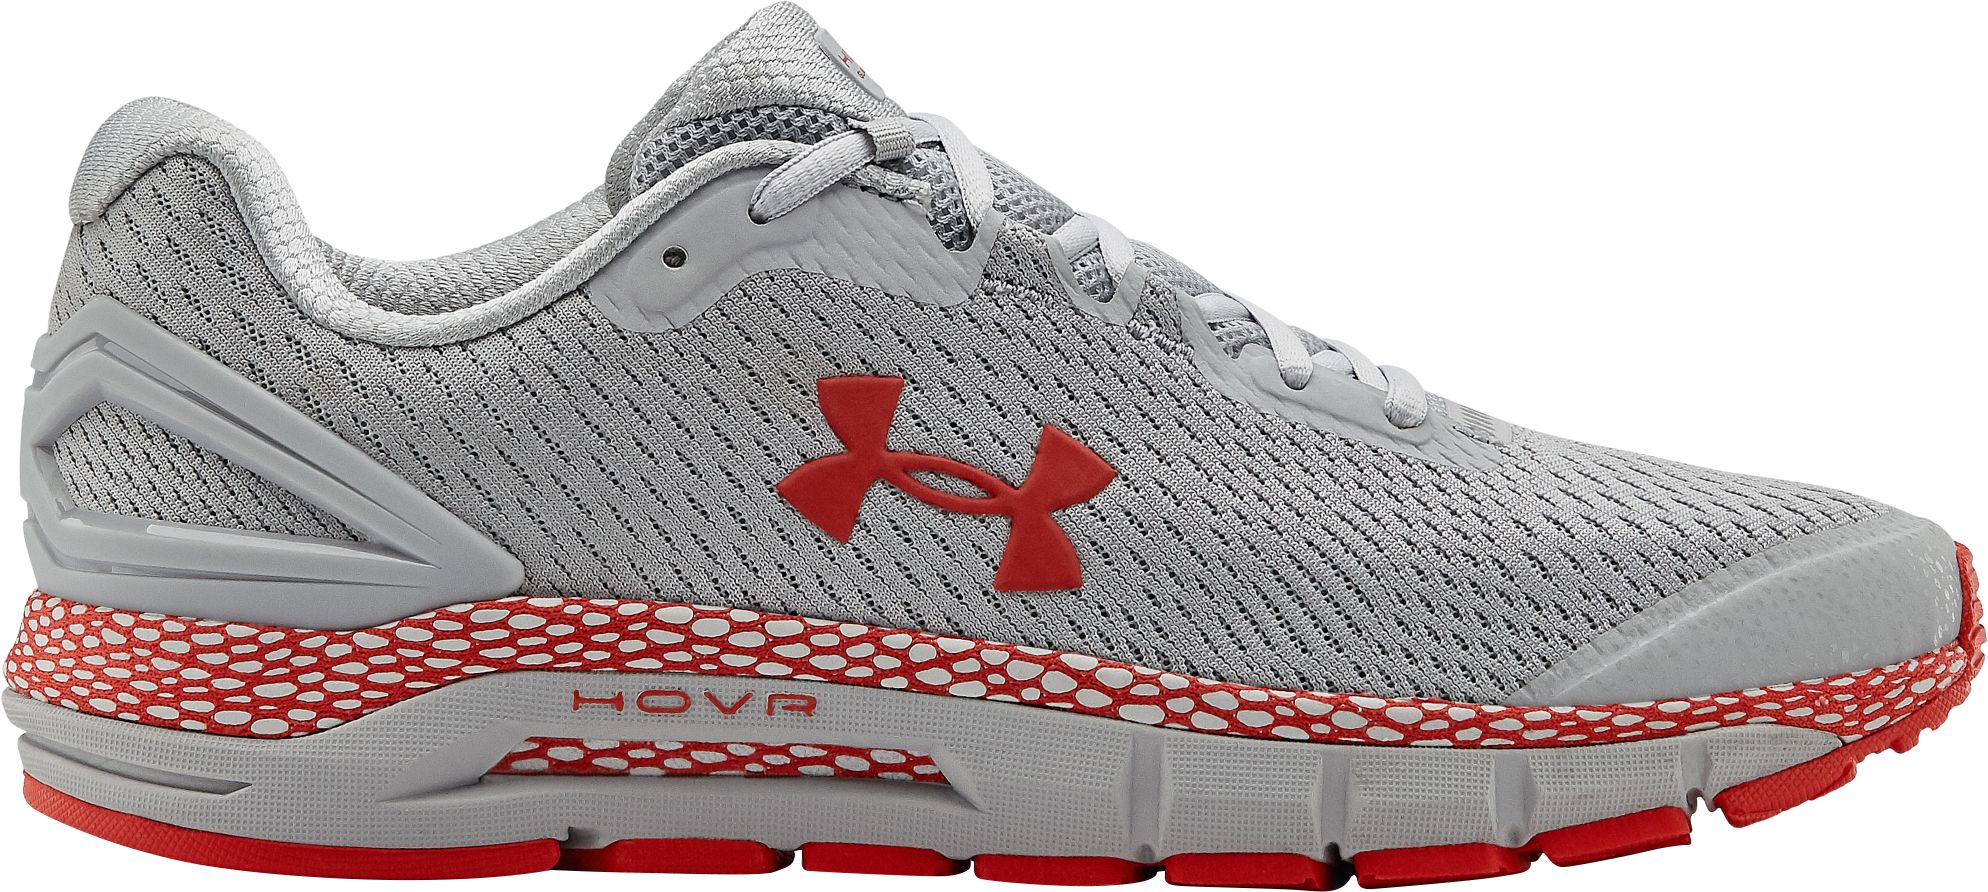 under armour hovr guardian review